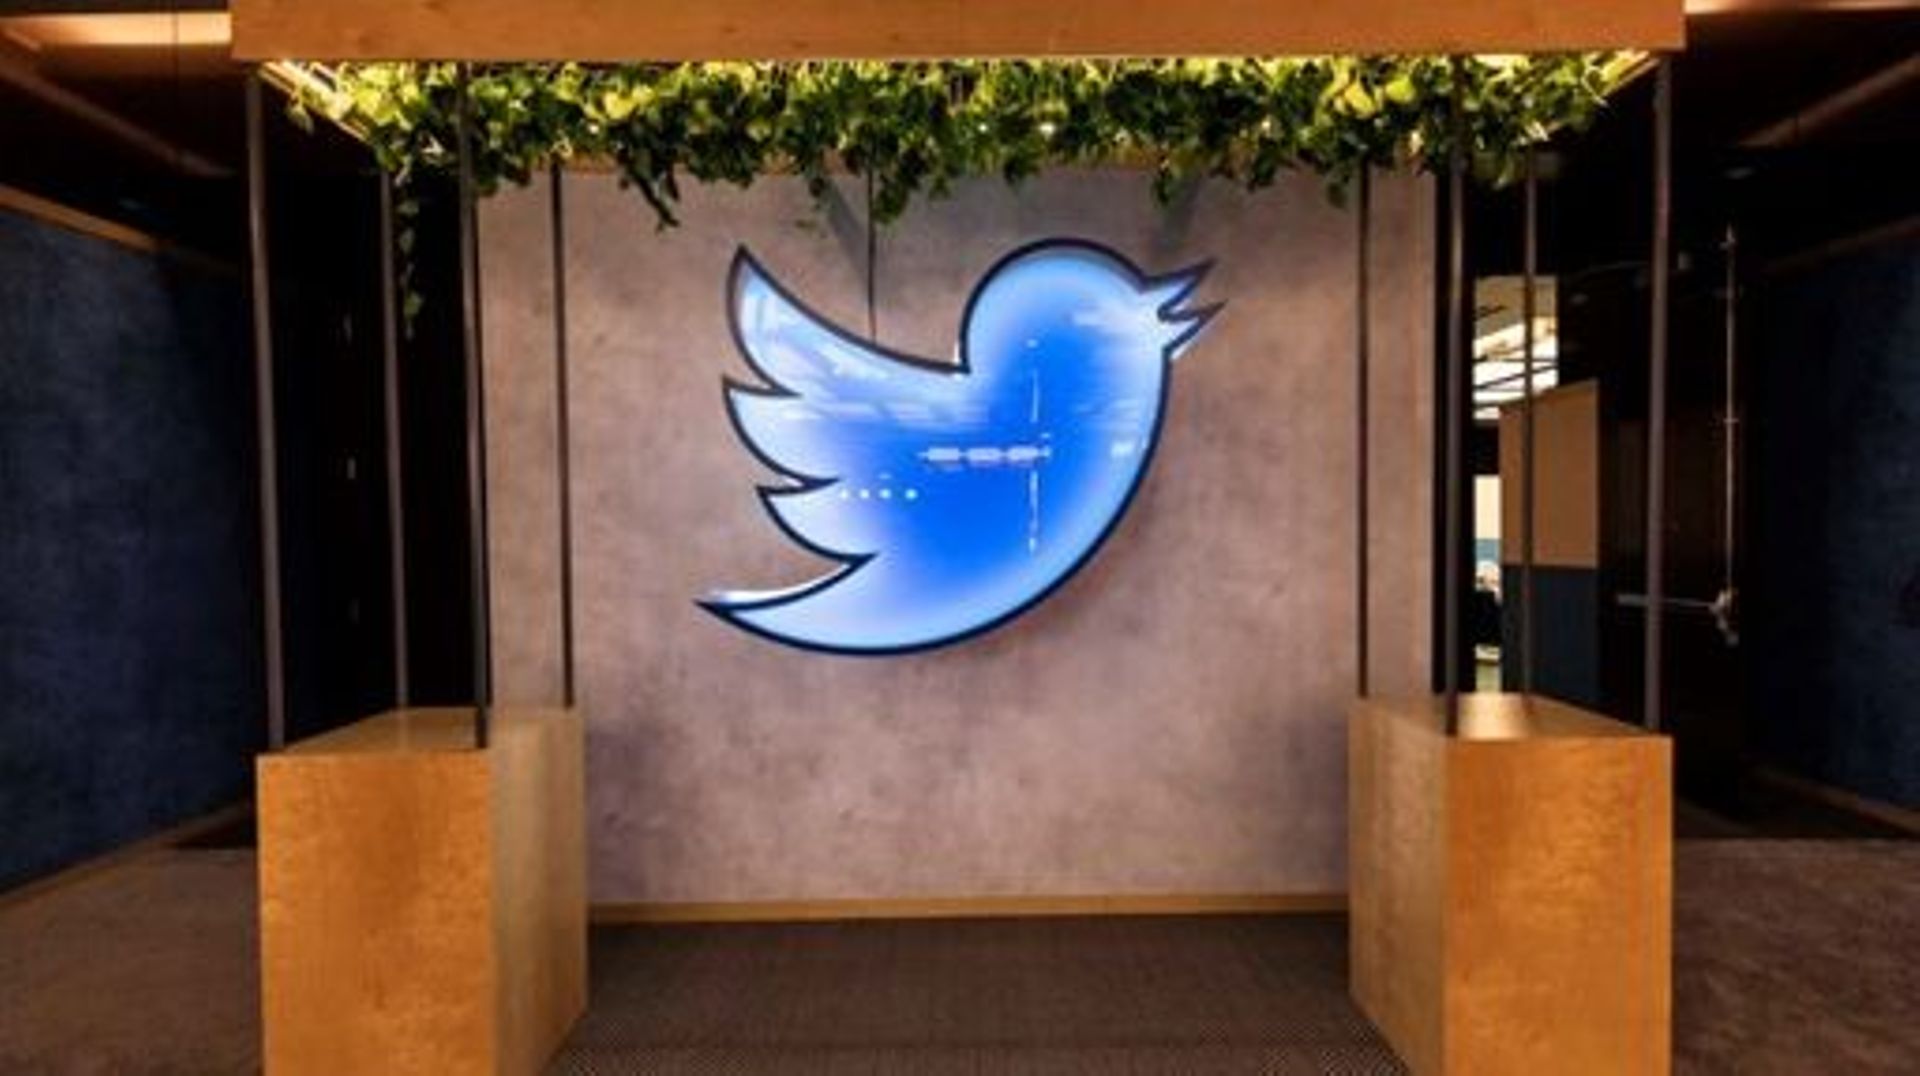 This undated handout photo courtesy of Heritage Global Partners (HGP) shows a neon Twitter bird light electrical display, part of Elon Musk online auction of "surplus corporate office assets of Twitter". A Twitter bird statue fetched $100,000 on January 1